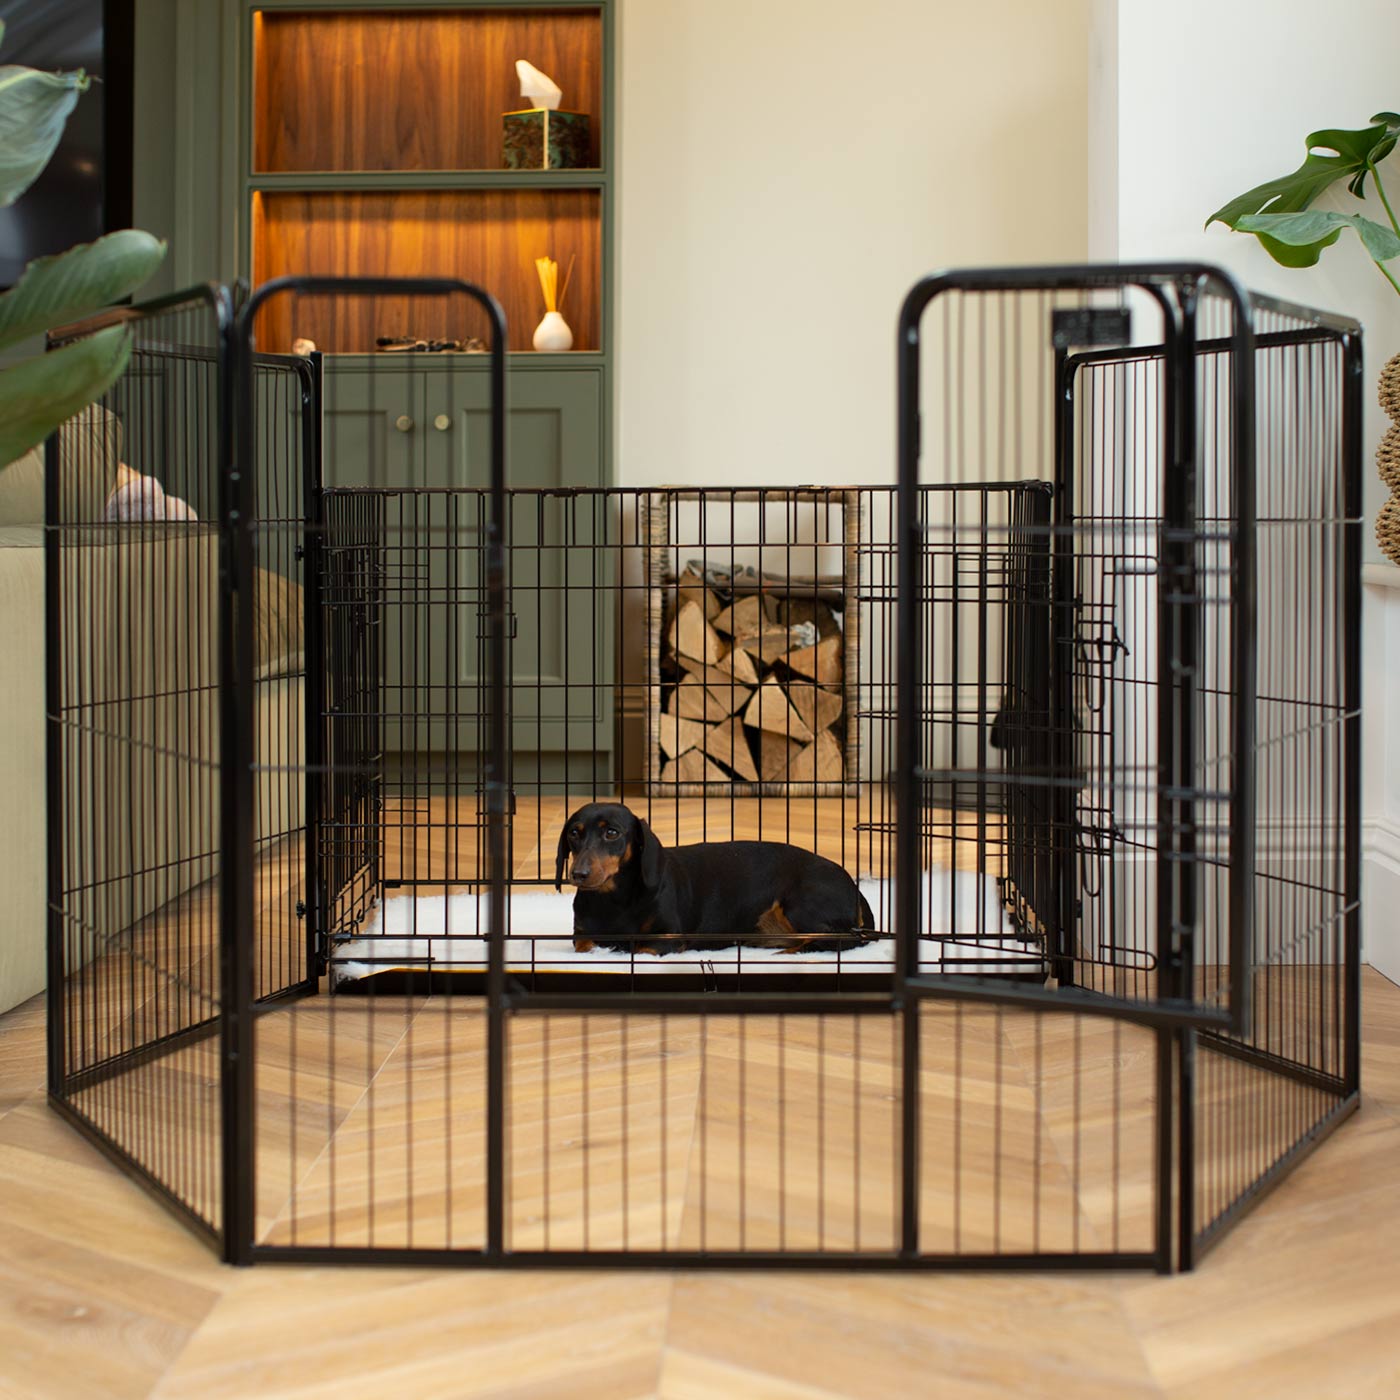 Ensure The Ultimate Puppy Safety with Our Heavy Duty 80cm High Black Metal Play Pen, Crafted to Take Your Pet Right Through Maturity! Powder Coated to Be Extra Hardwearing! 6 panels that are 80cm high and attachments to connect to any Cage. The modular system allows you to change the puppy pen shape with multiple layouts! Available To Now at Lords & Labradors US